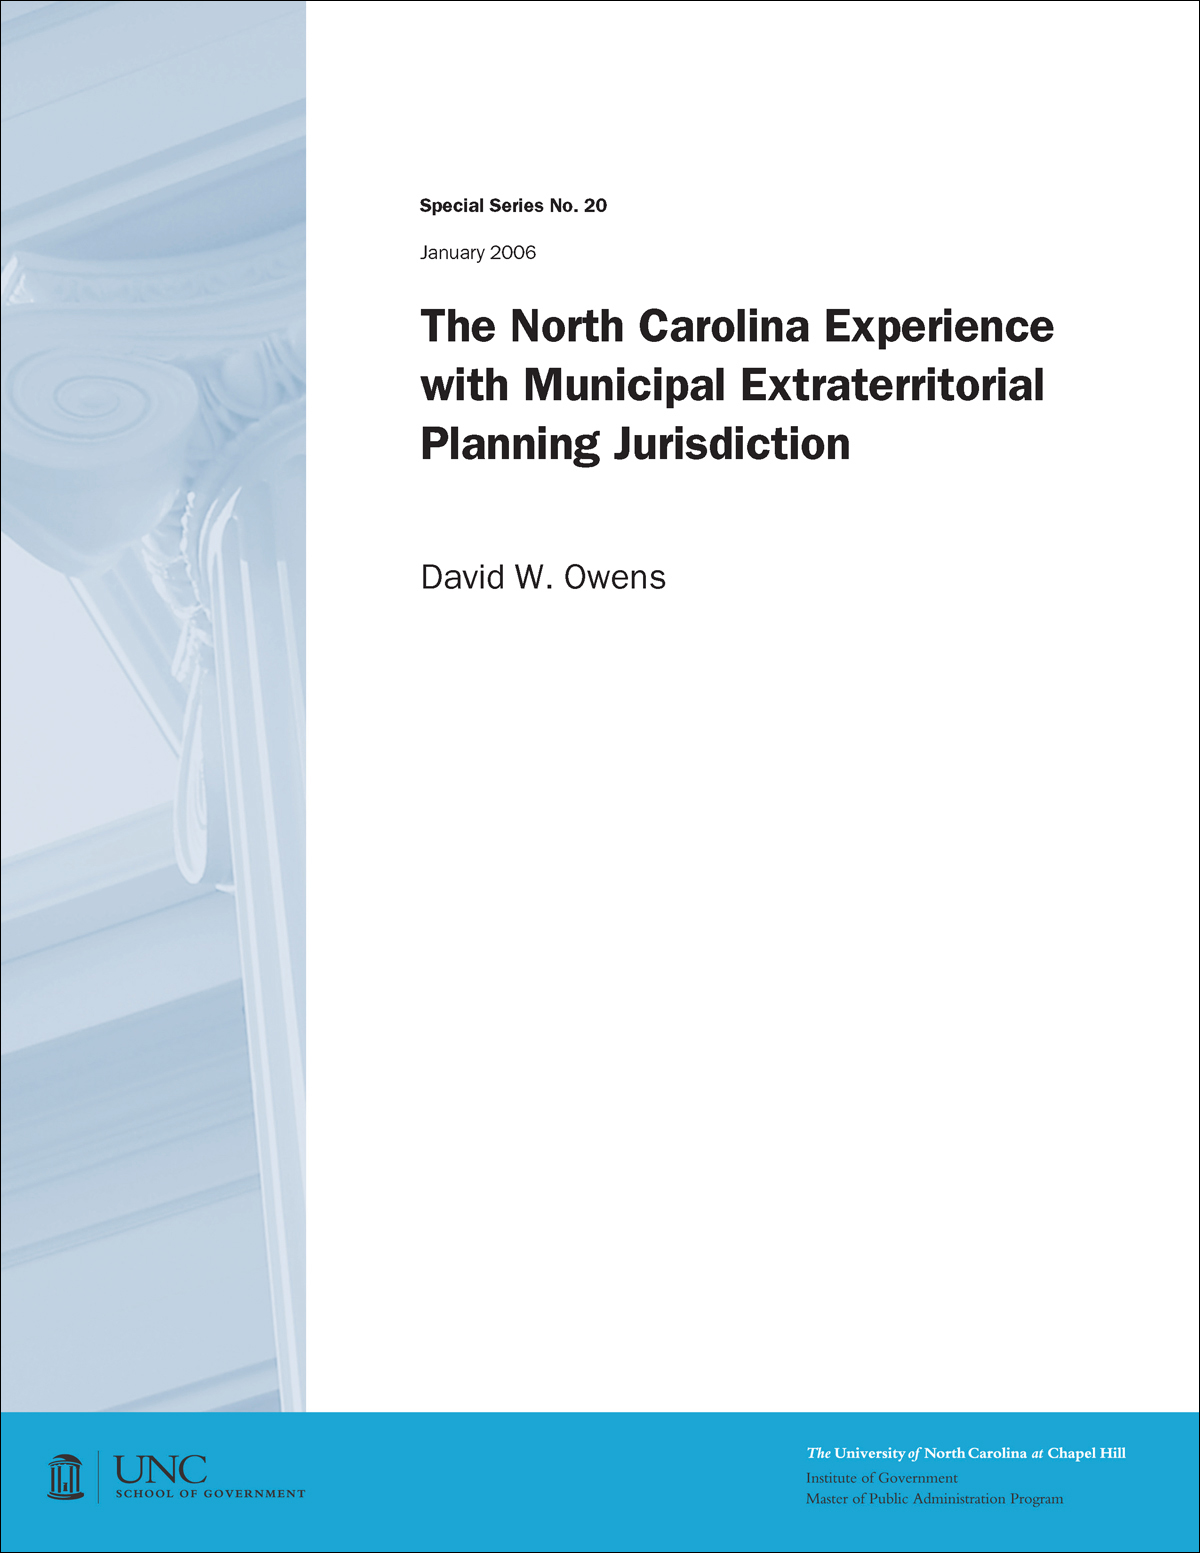 North Carolina Experience with Municipal Extraterritorial Planning Jurisdiction, Special Series No. 20, January 2006